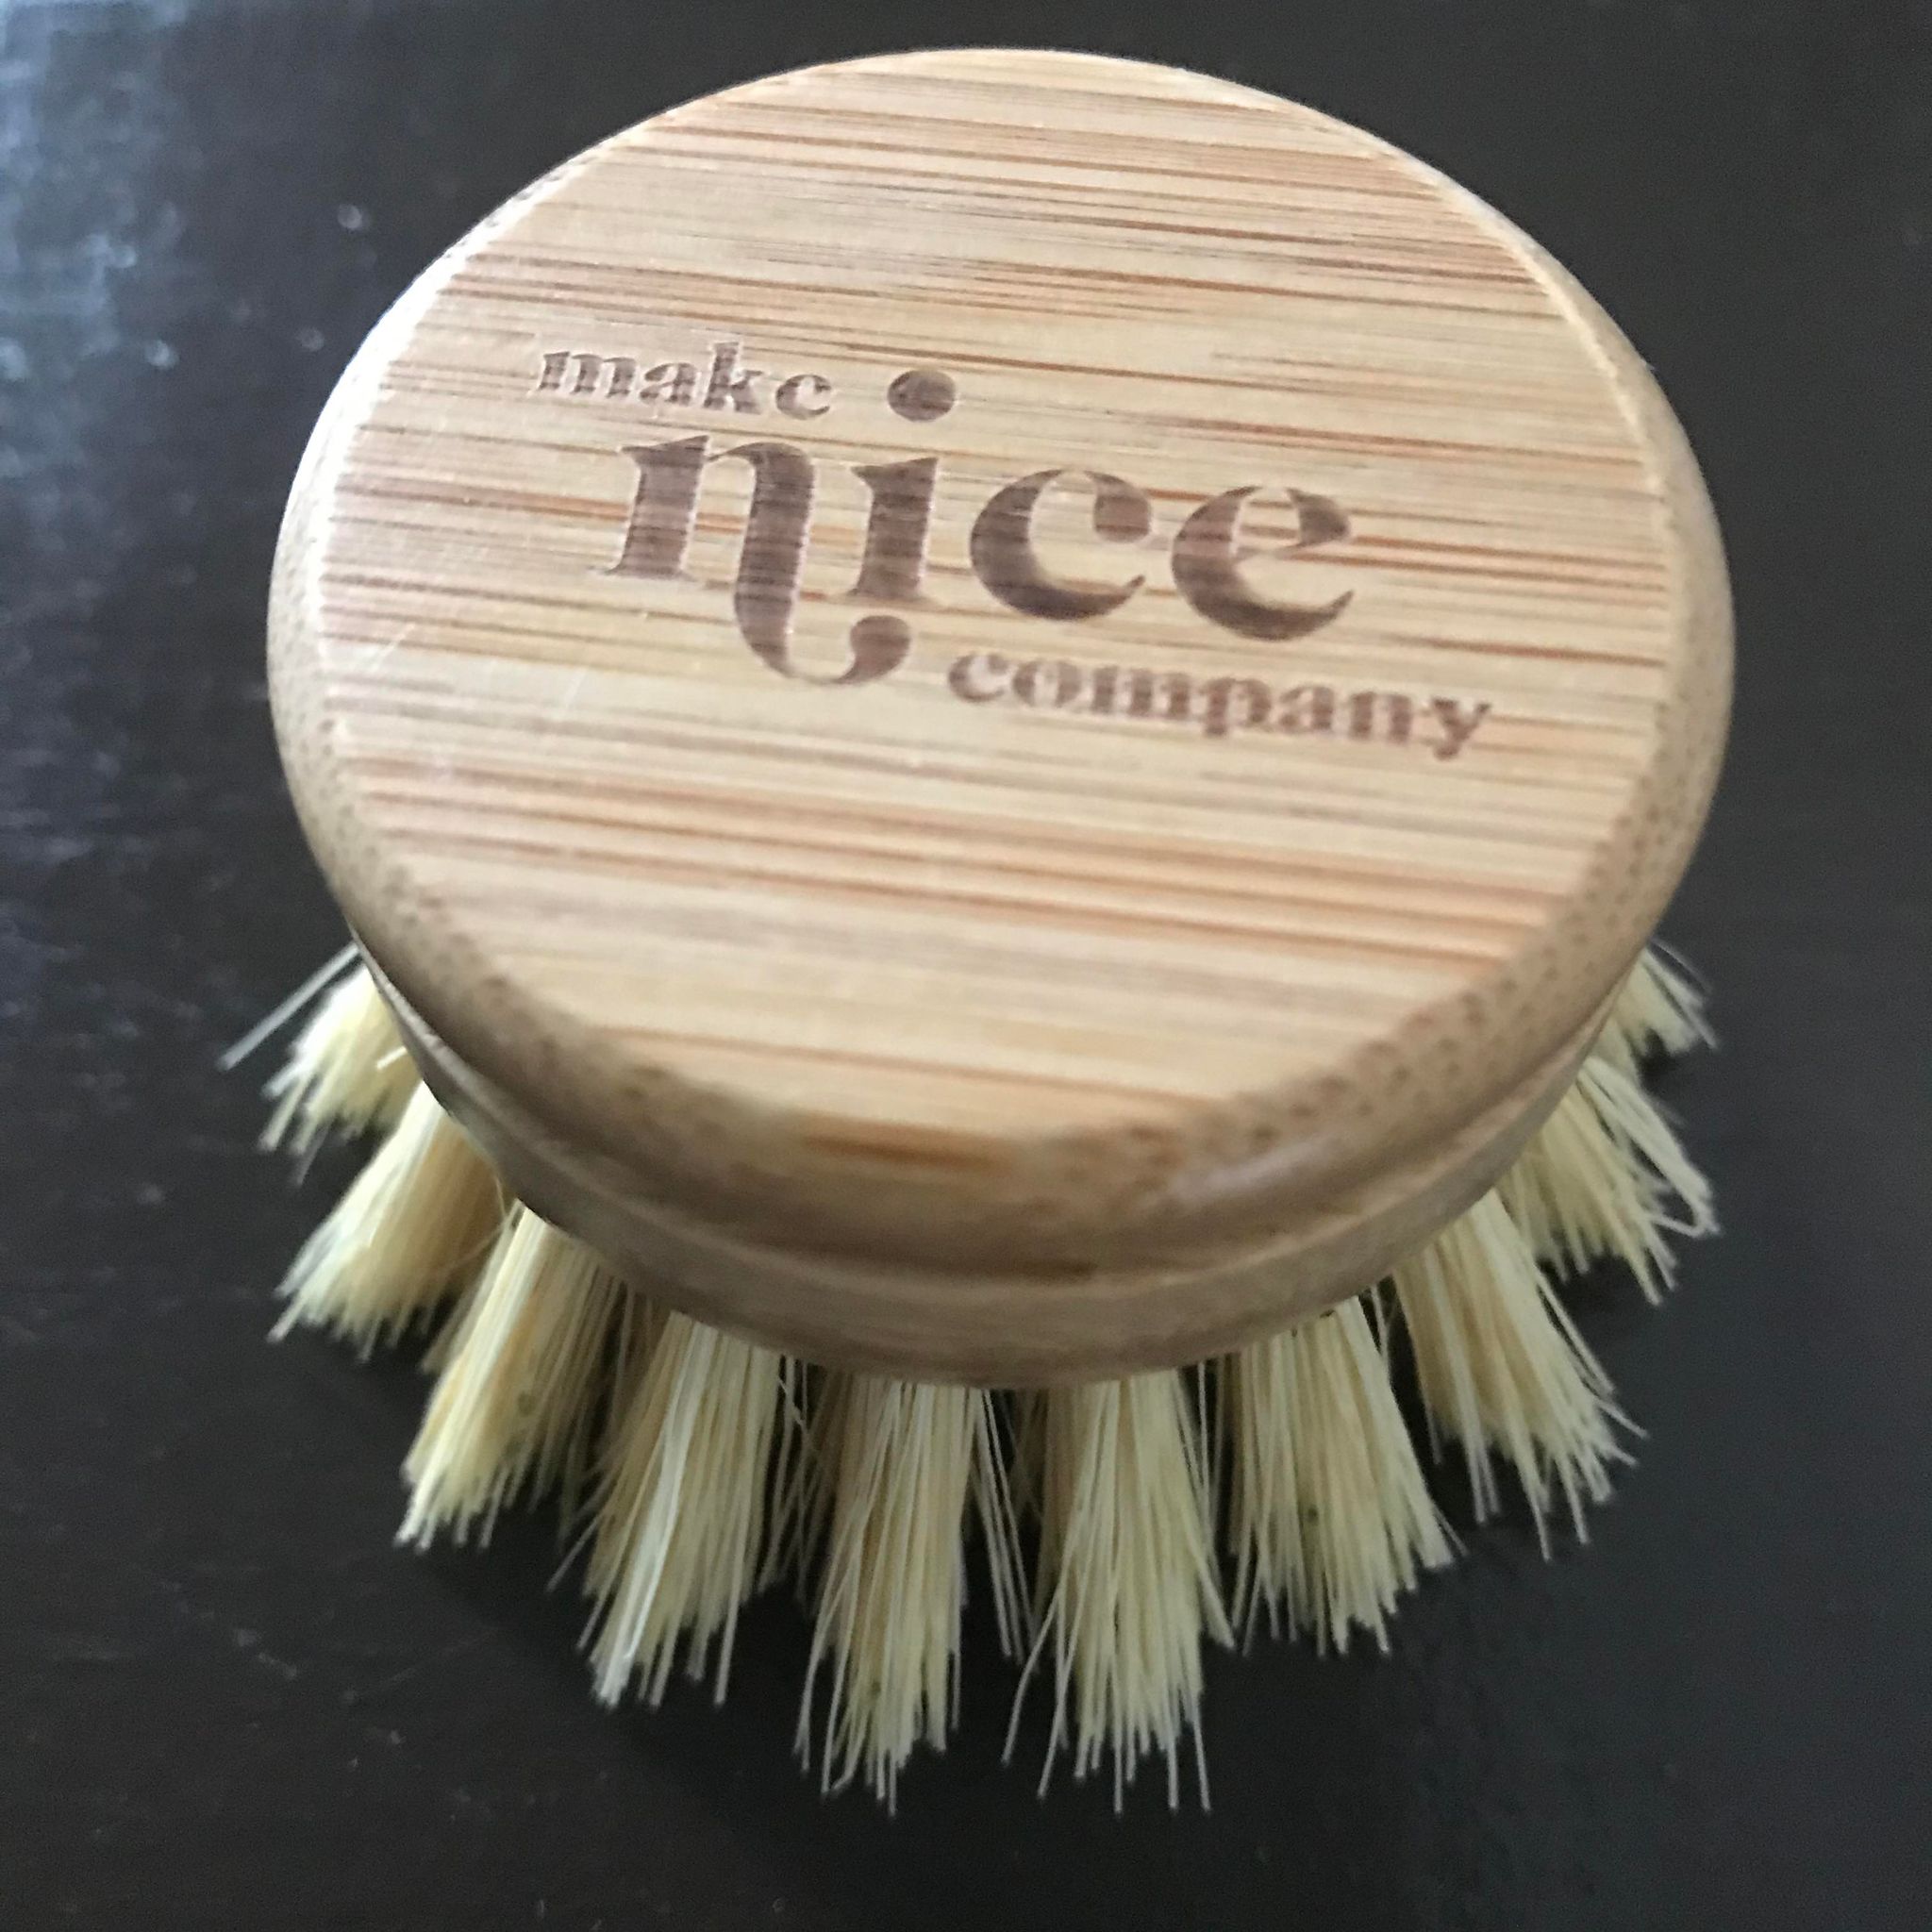 The bristles of this replacement head brush for the make nice dish soap kitchen brush are made of Tampico (from the Agave plant) and the handle is made of beechwood and metal.